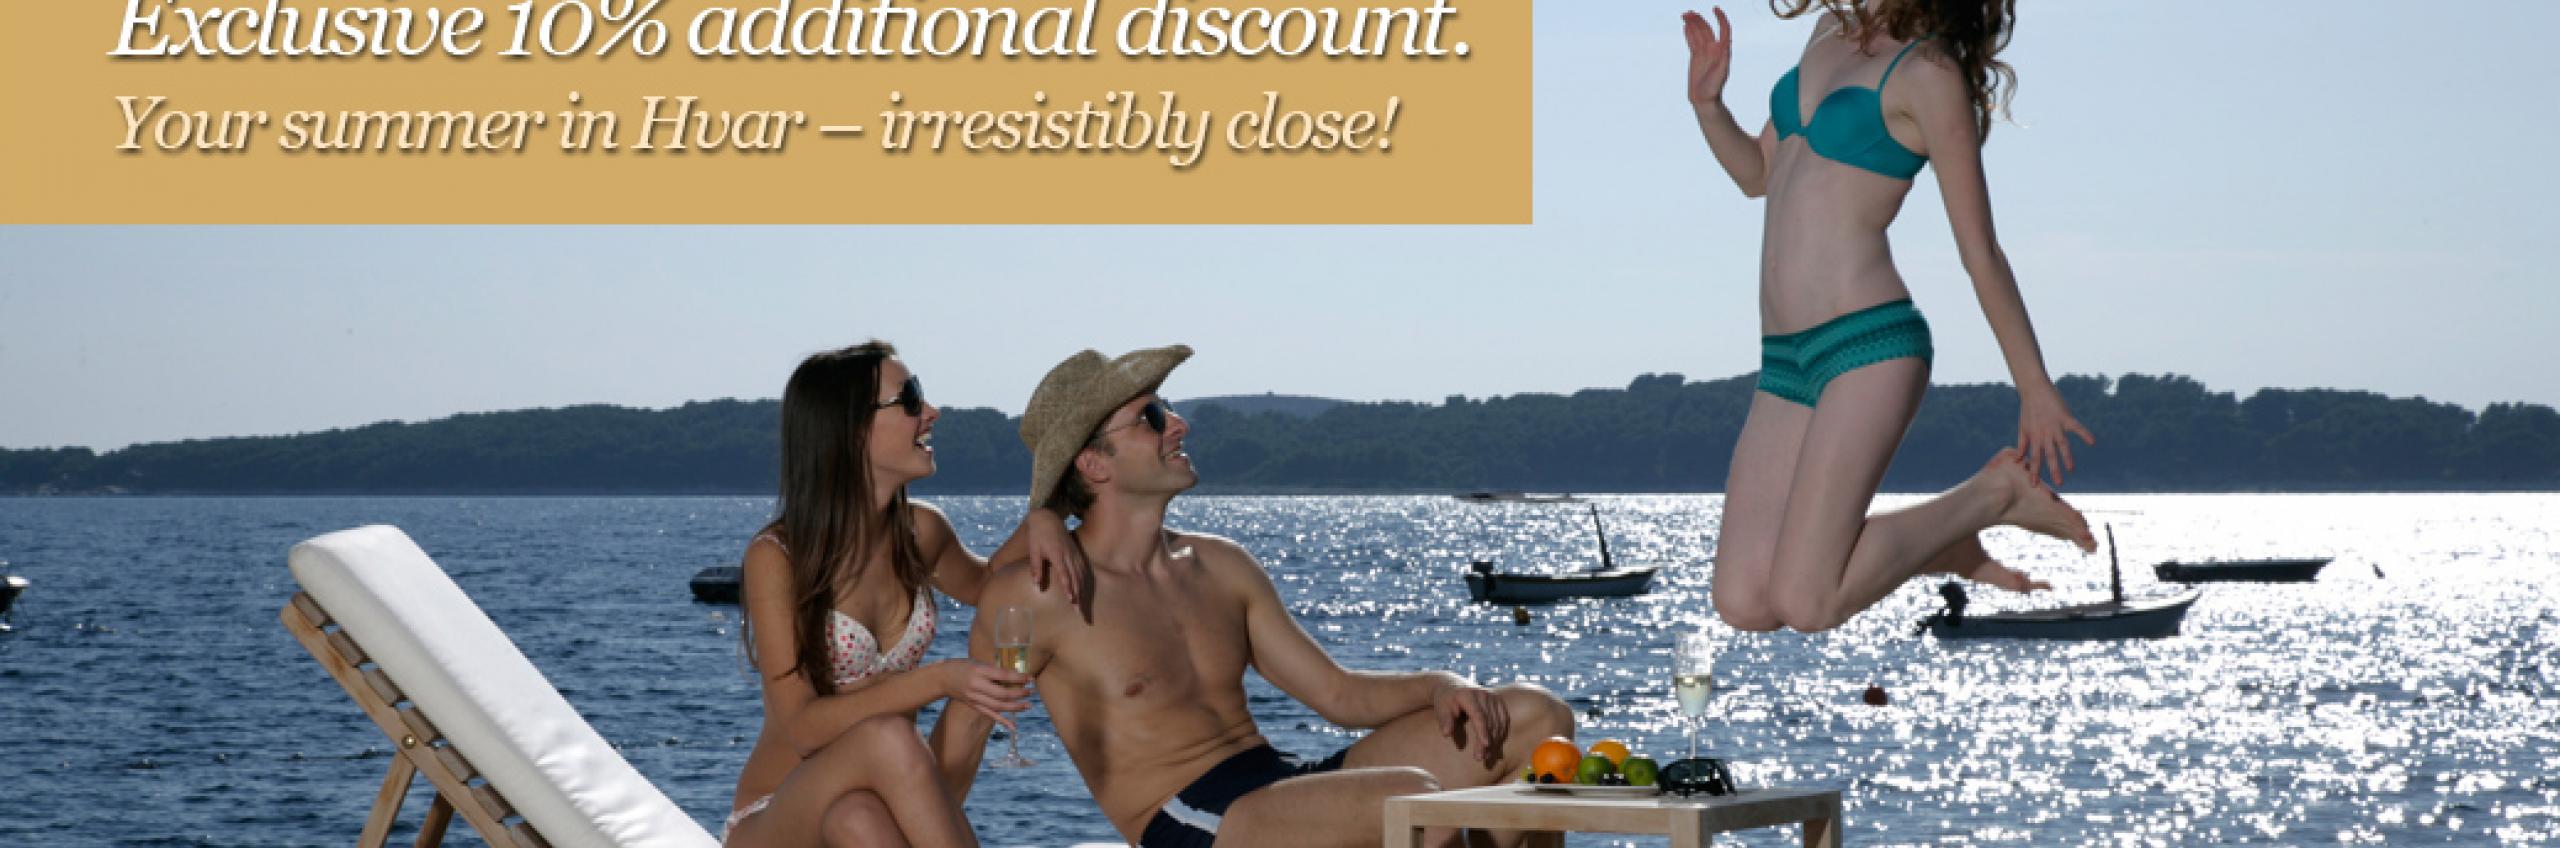 Best Rate - Exclusive discount available only on www.suncanihvar.com